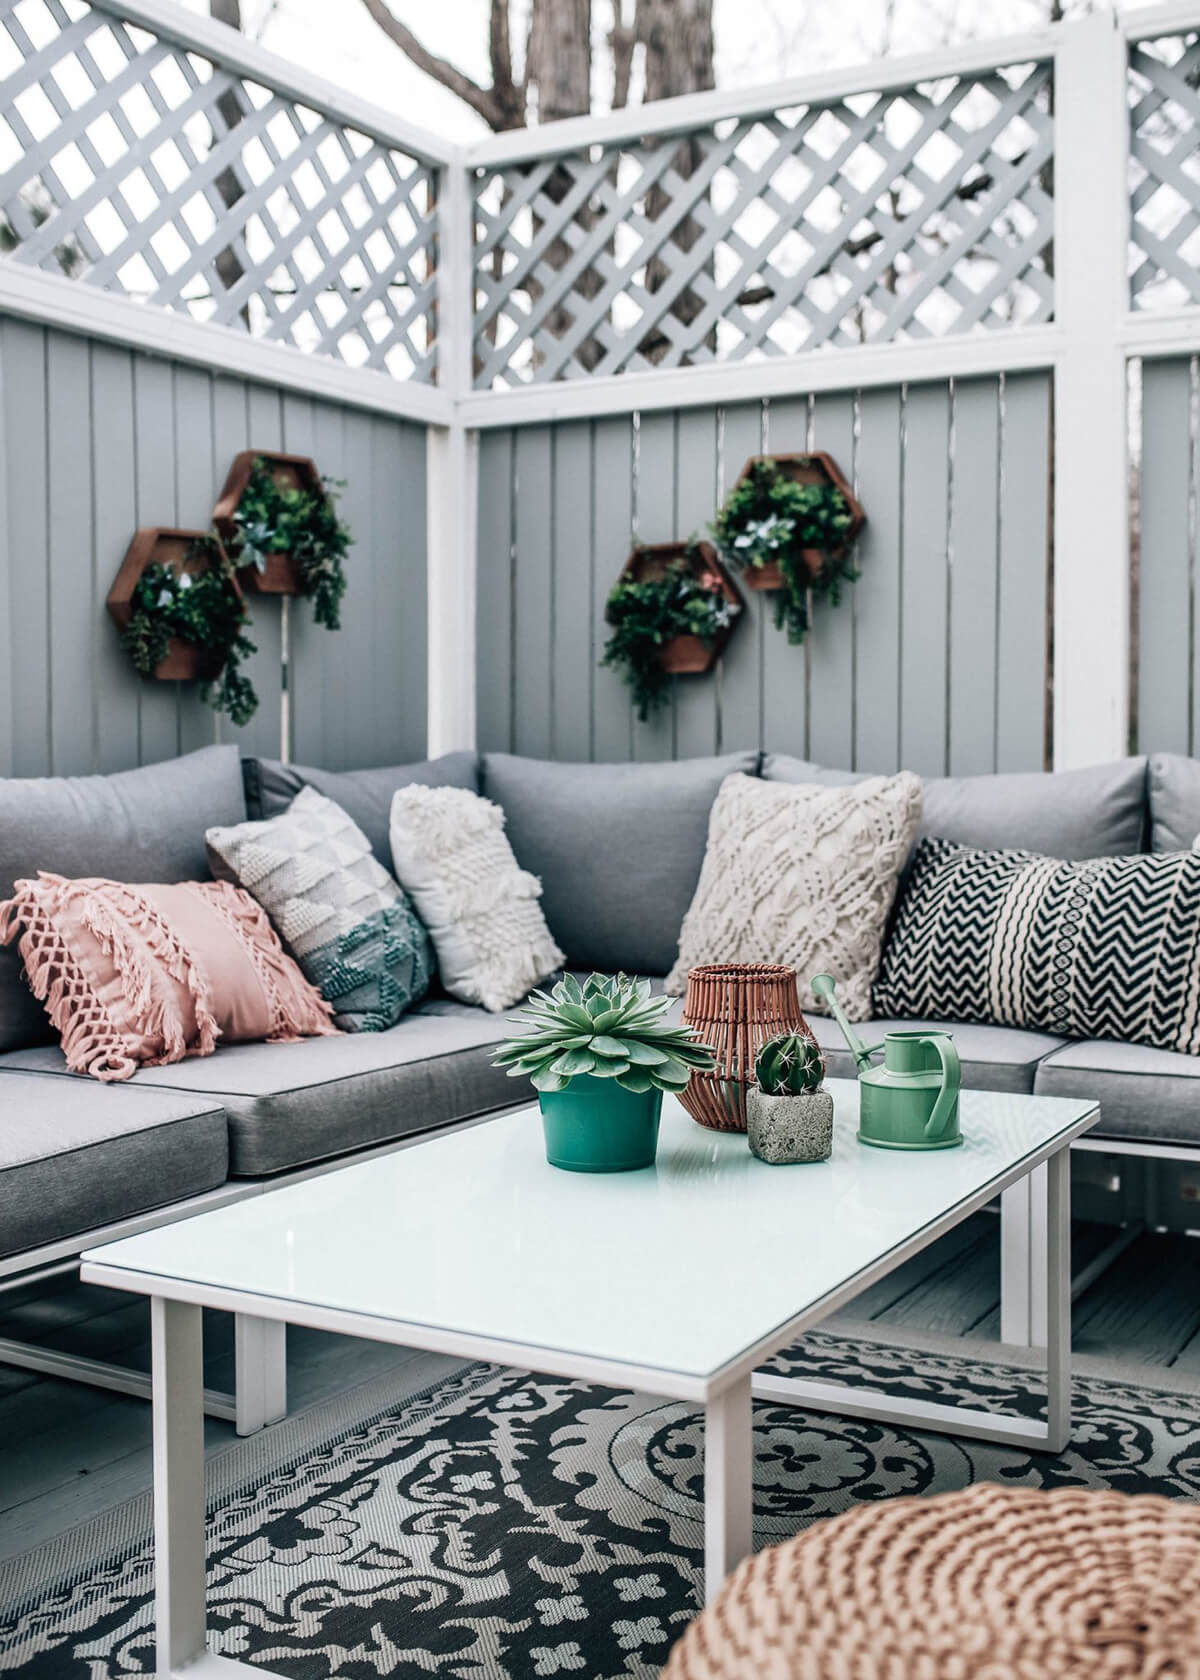 Inviting Back Porch Sitting Area is Soothing